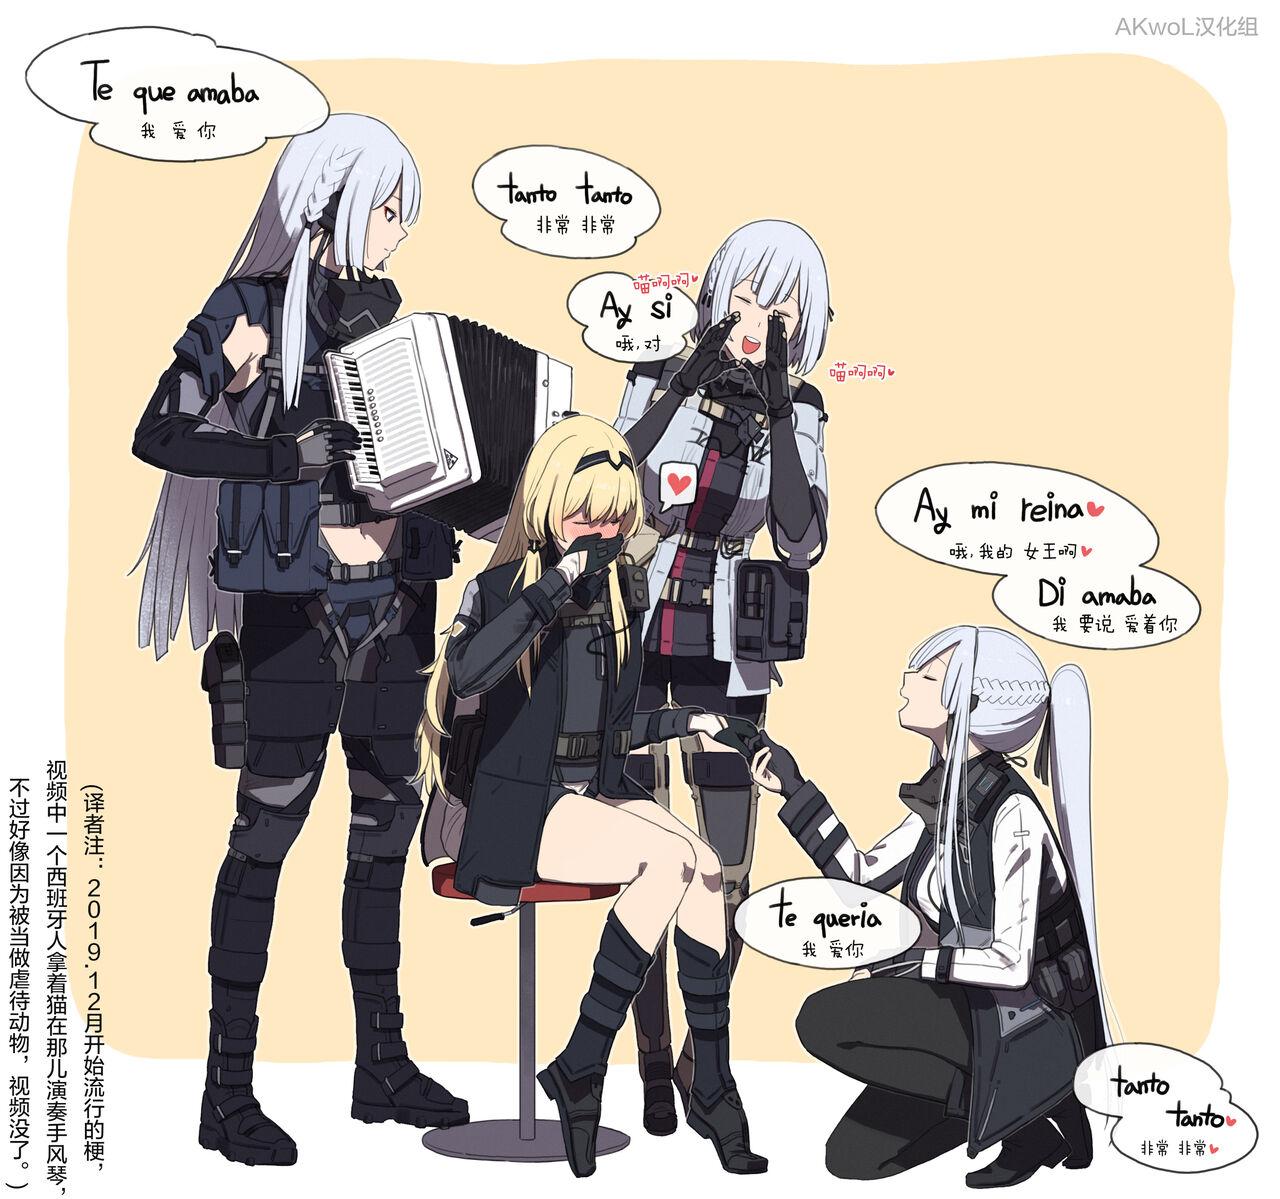 Nut Patreon 2020.01-2020.12 - Girls frontline Gay Blondhair - Page 1